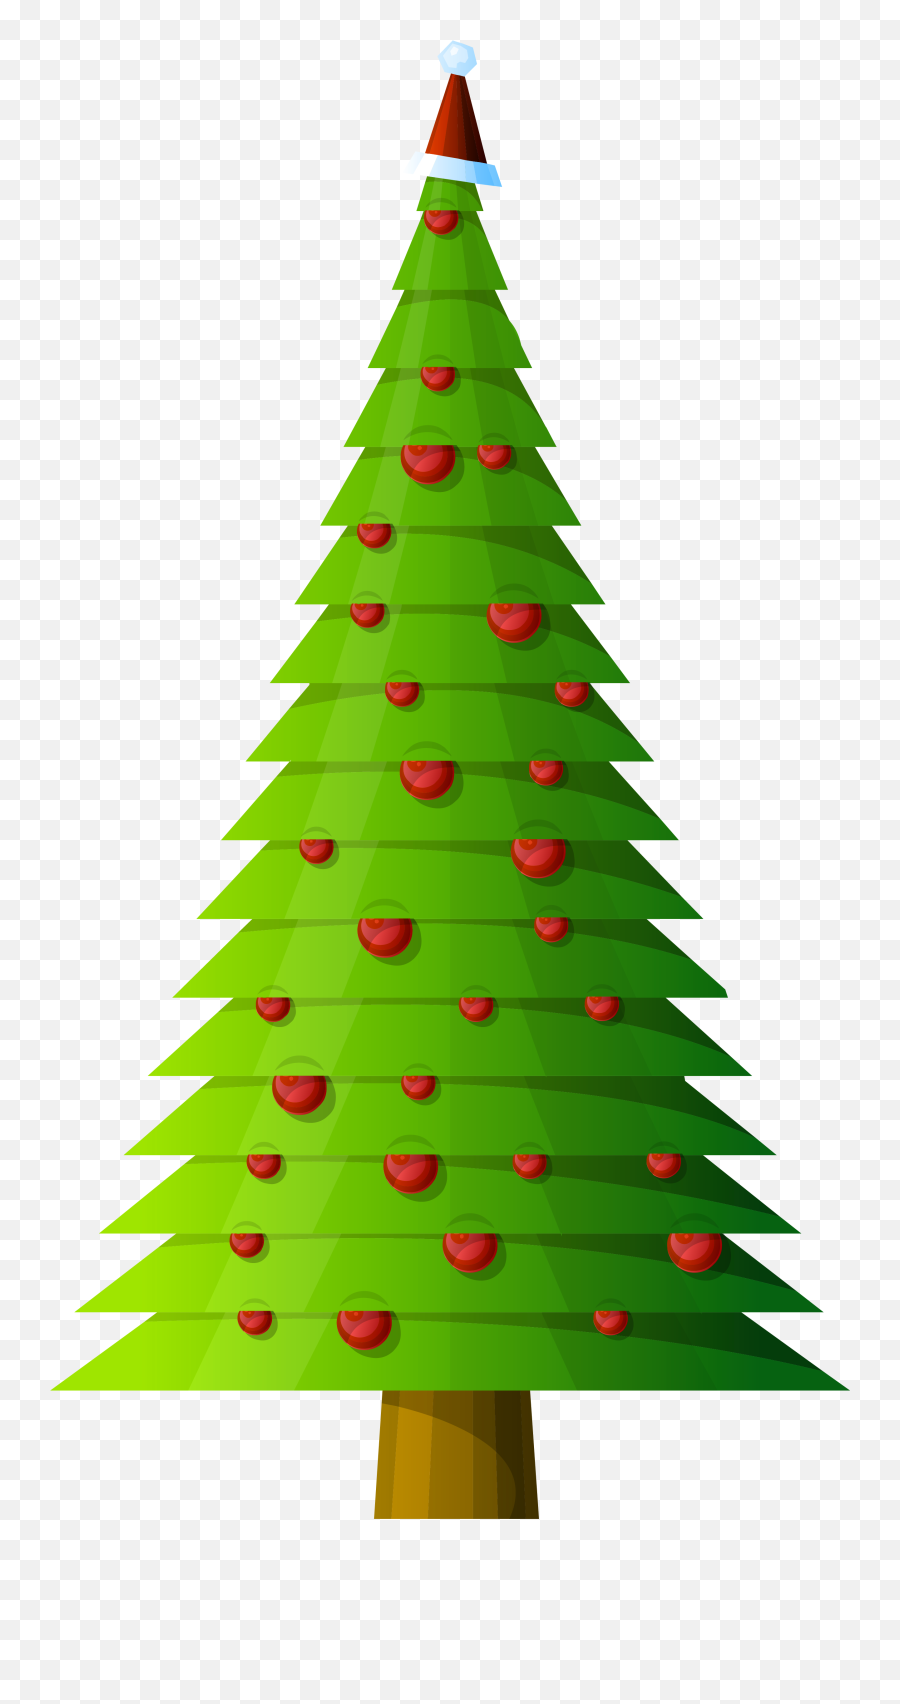 Modern Christmas Tree Clipart Free - Clipart Best Clipart Best Emoji,Tree Clipart Free